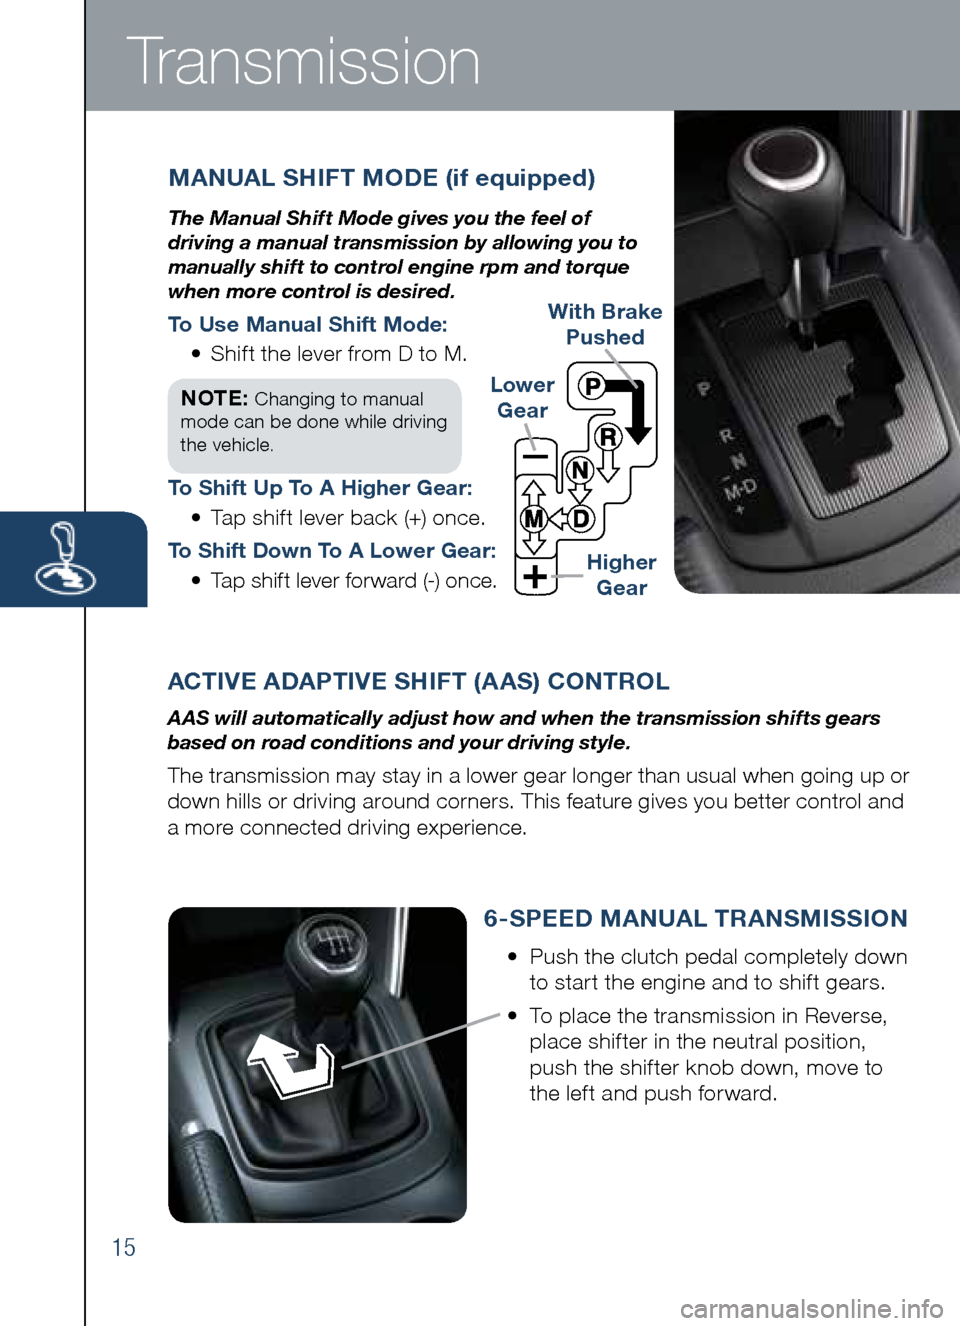 MAZDA MODEL CX-5 2014  Smart Start Guide (in English) ACTIVE ADAPTIVE SHIFT (AAS) CONTROL
A AS will automatically adjust how and when the transmission shifts gears 
based on road conditions and your driving style.
The	transmission	may	stay	in	a	lower	gea